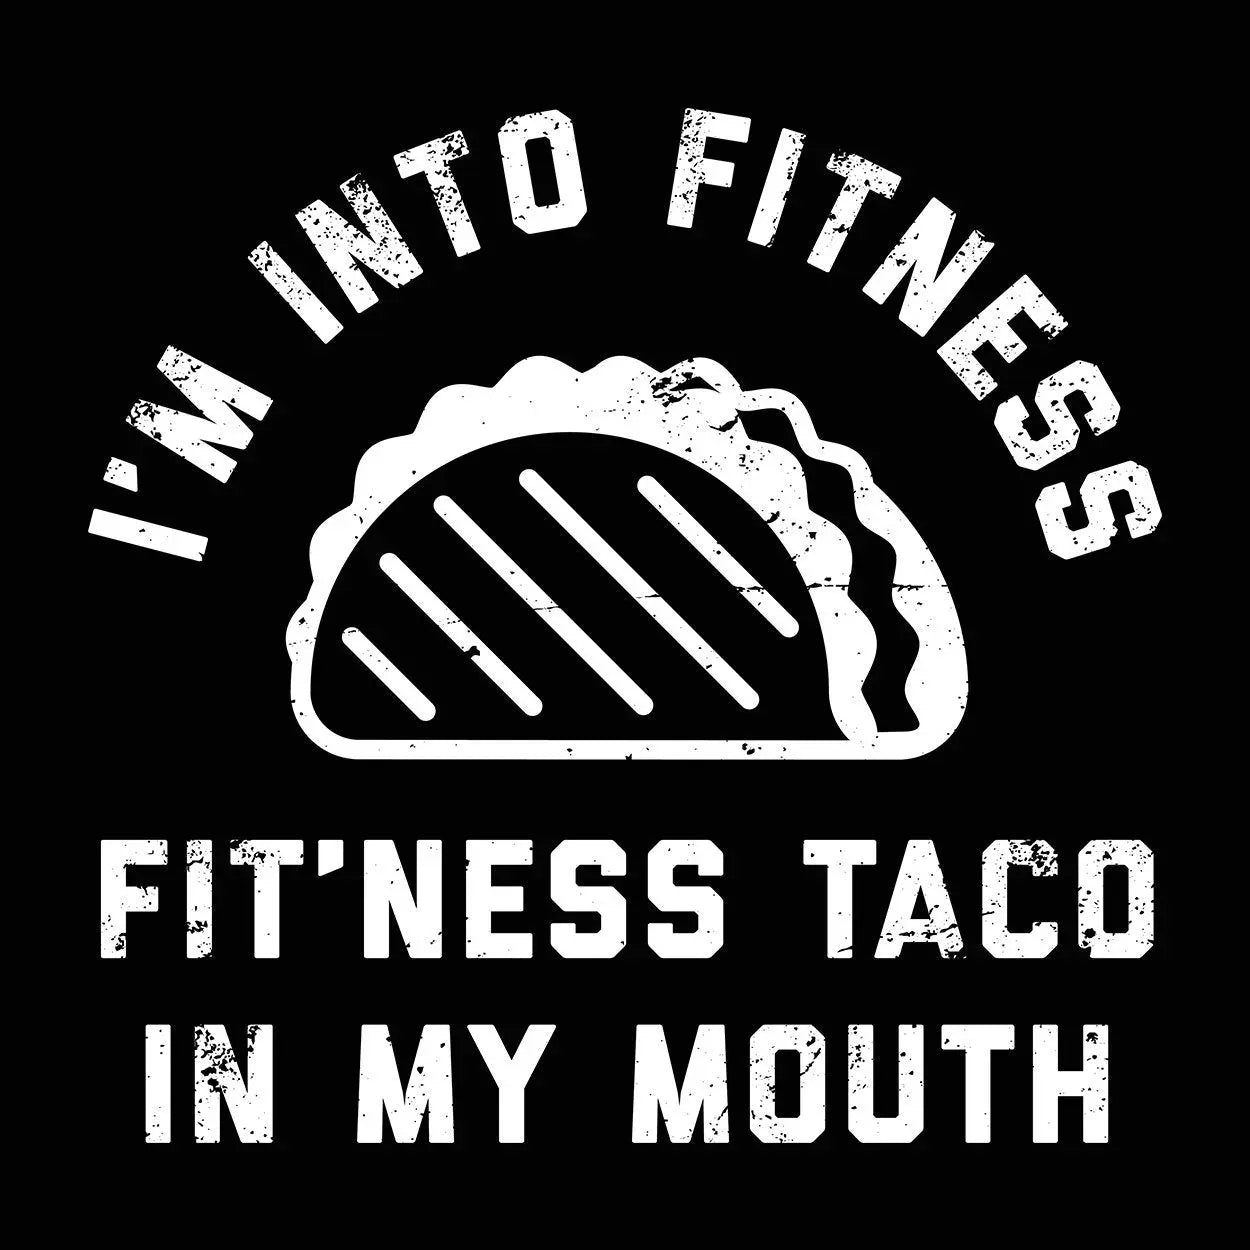 Fitness Taco In My Mouth Tshirt - Donkey Tees